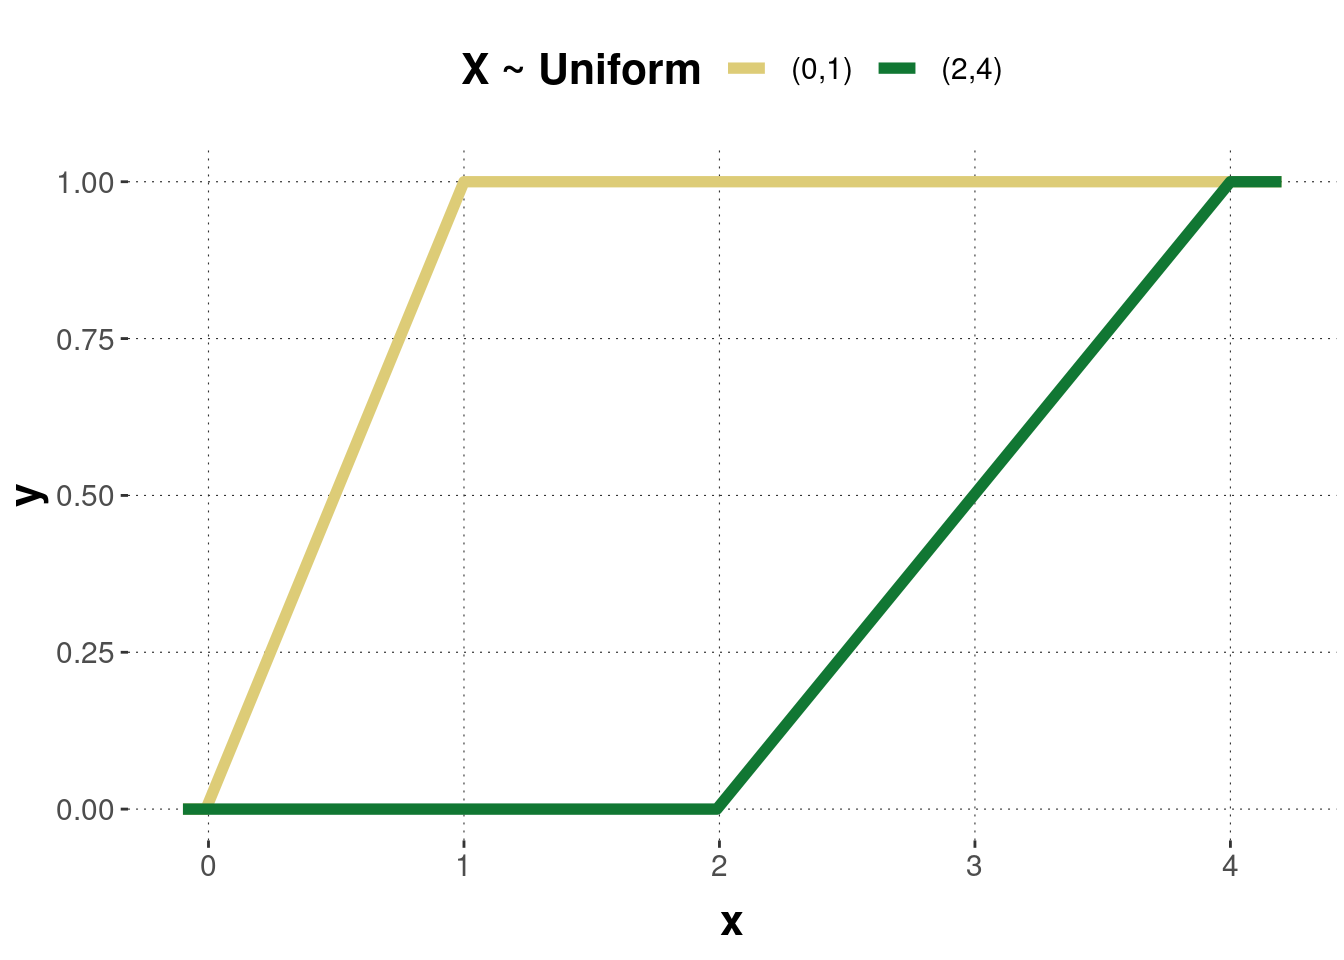 The cumulative distribution functions of the uniform distributions corresponding to the previous probability density functions.